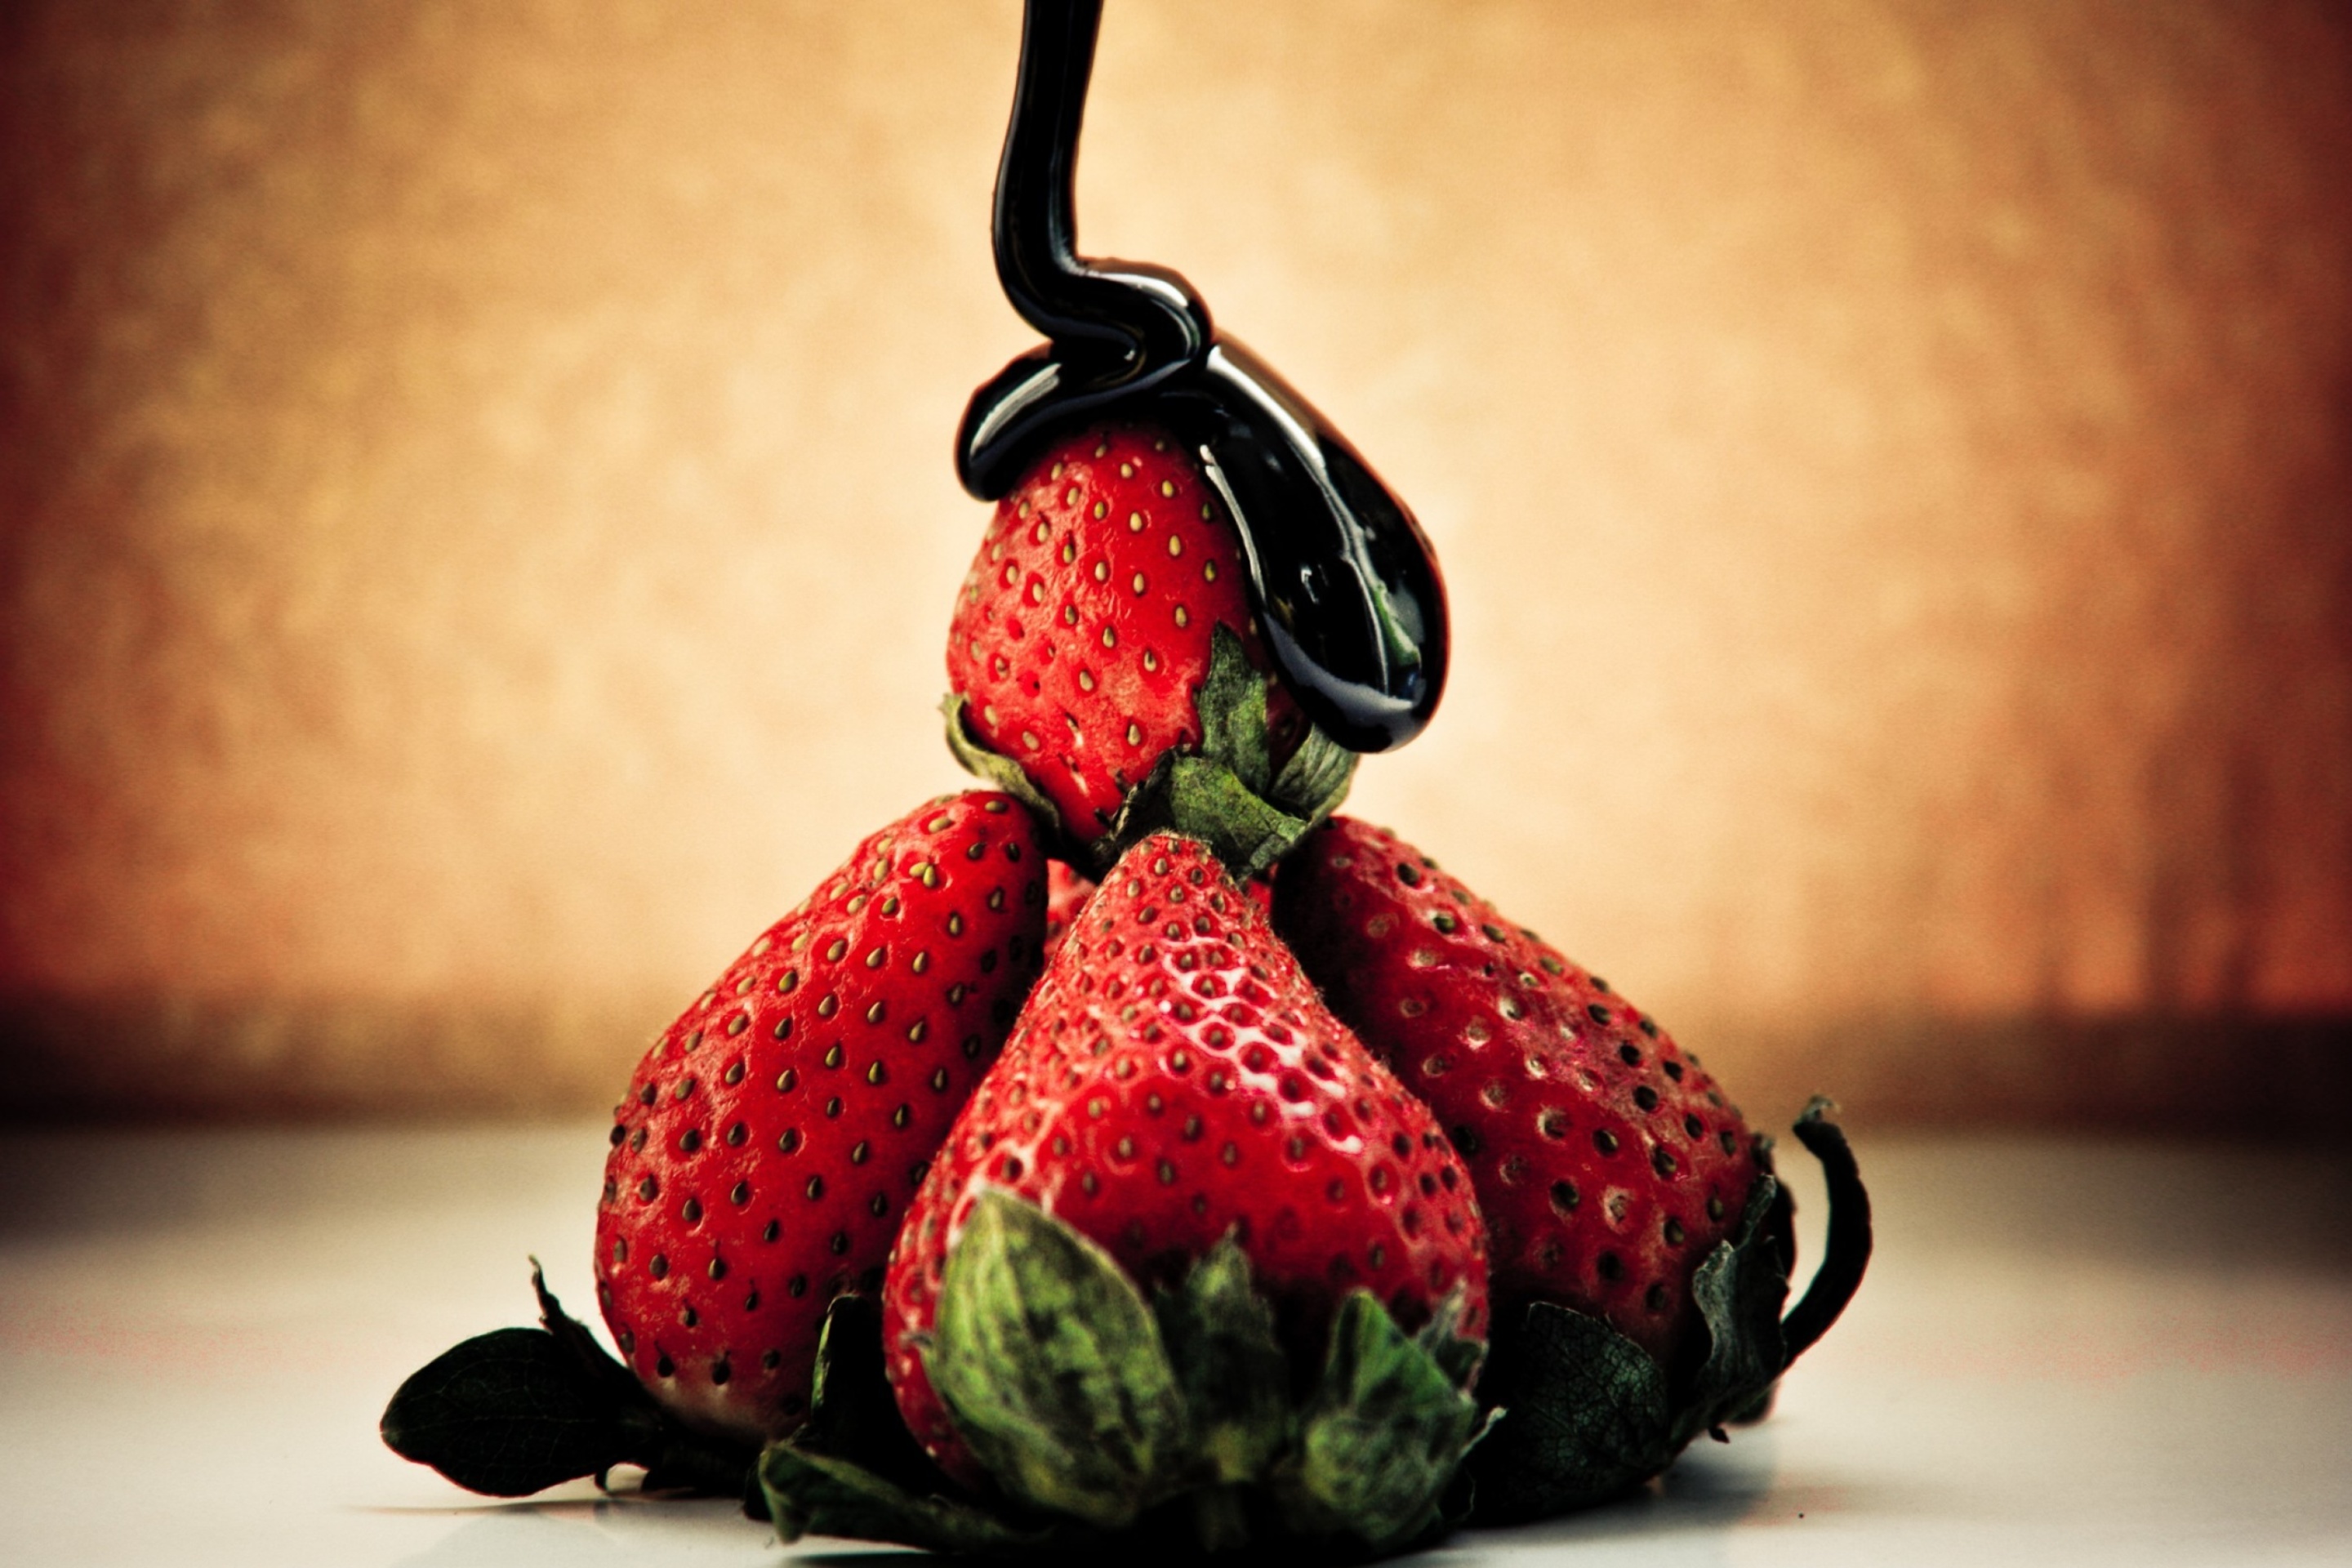 Strawberries with chocolate wallpaper 2880x1920